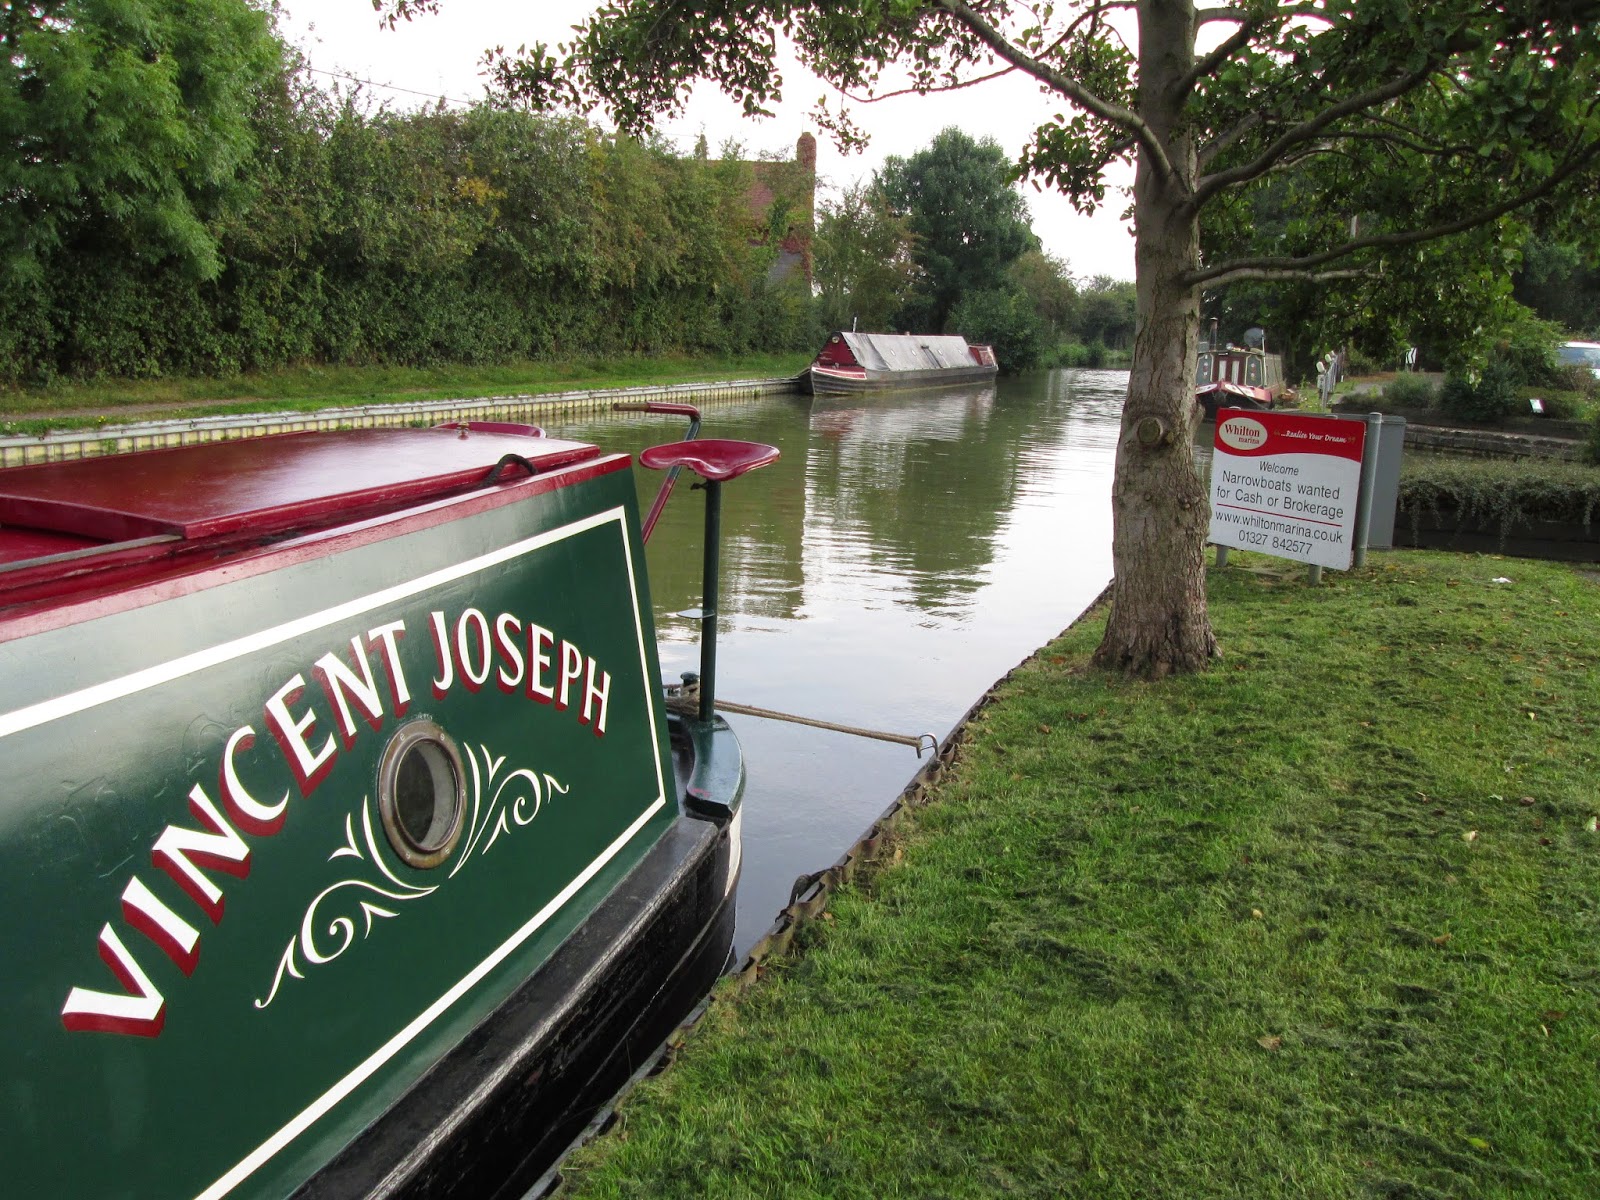 Oops! The moment £80,000 rented narrowboat started to sink after getting wedged in lock